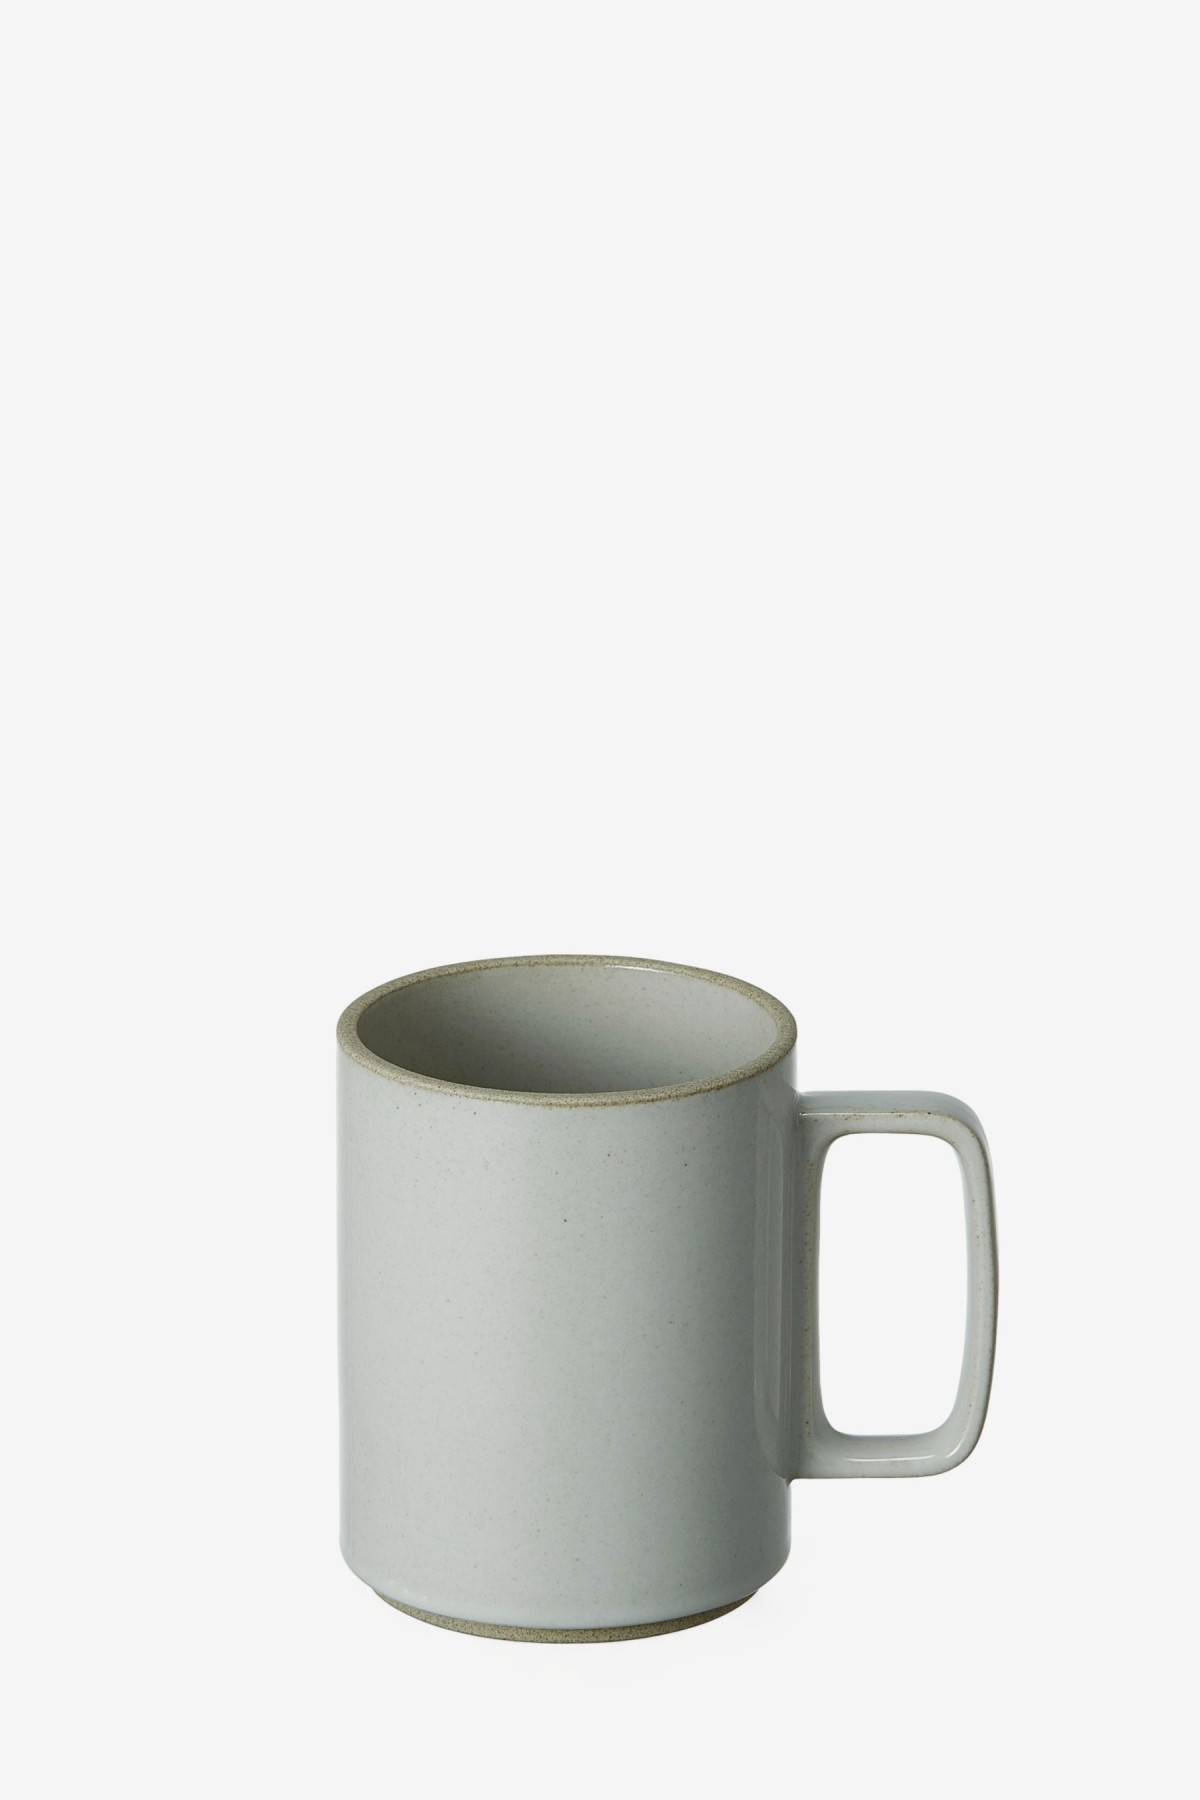 Hasami Porcelain Mug Cup 85×106mm Large in Clear Grey